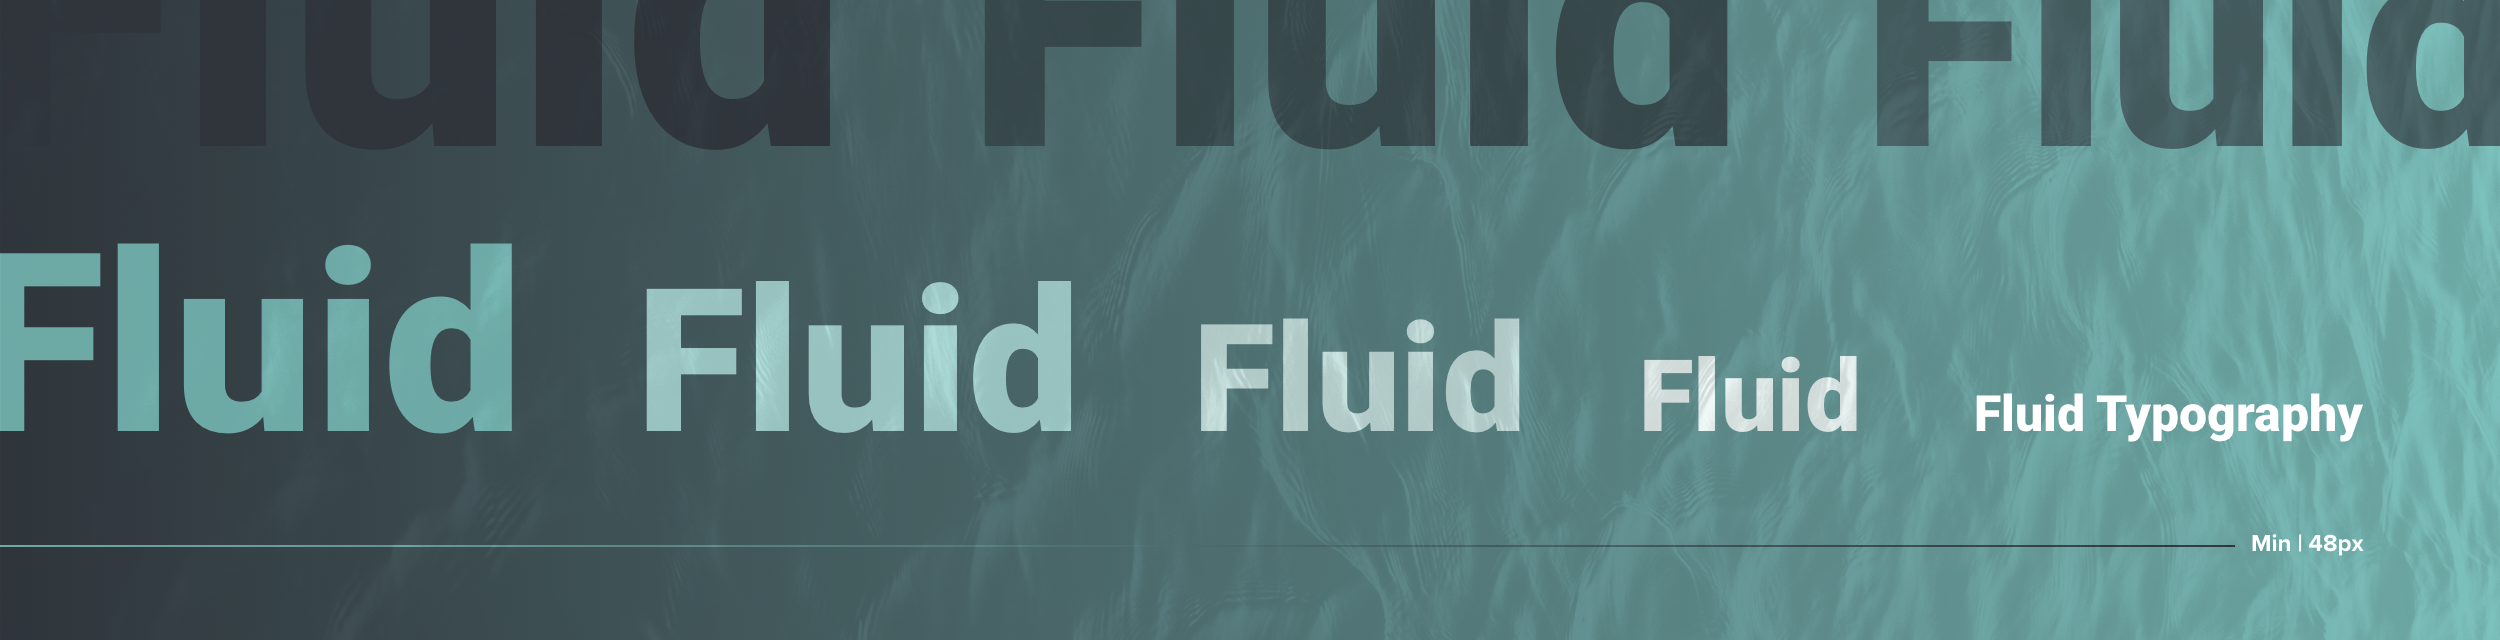 Water-like background with the word 'fluid' repeated in two different colors and varying sizes.